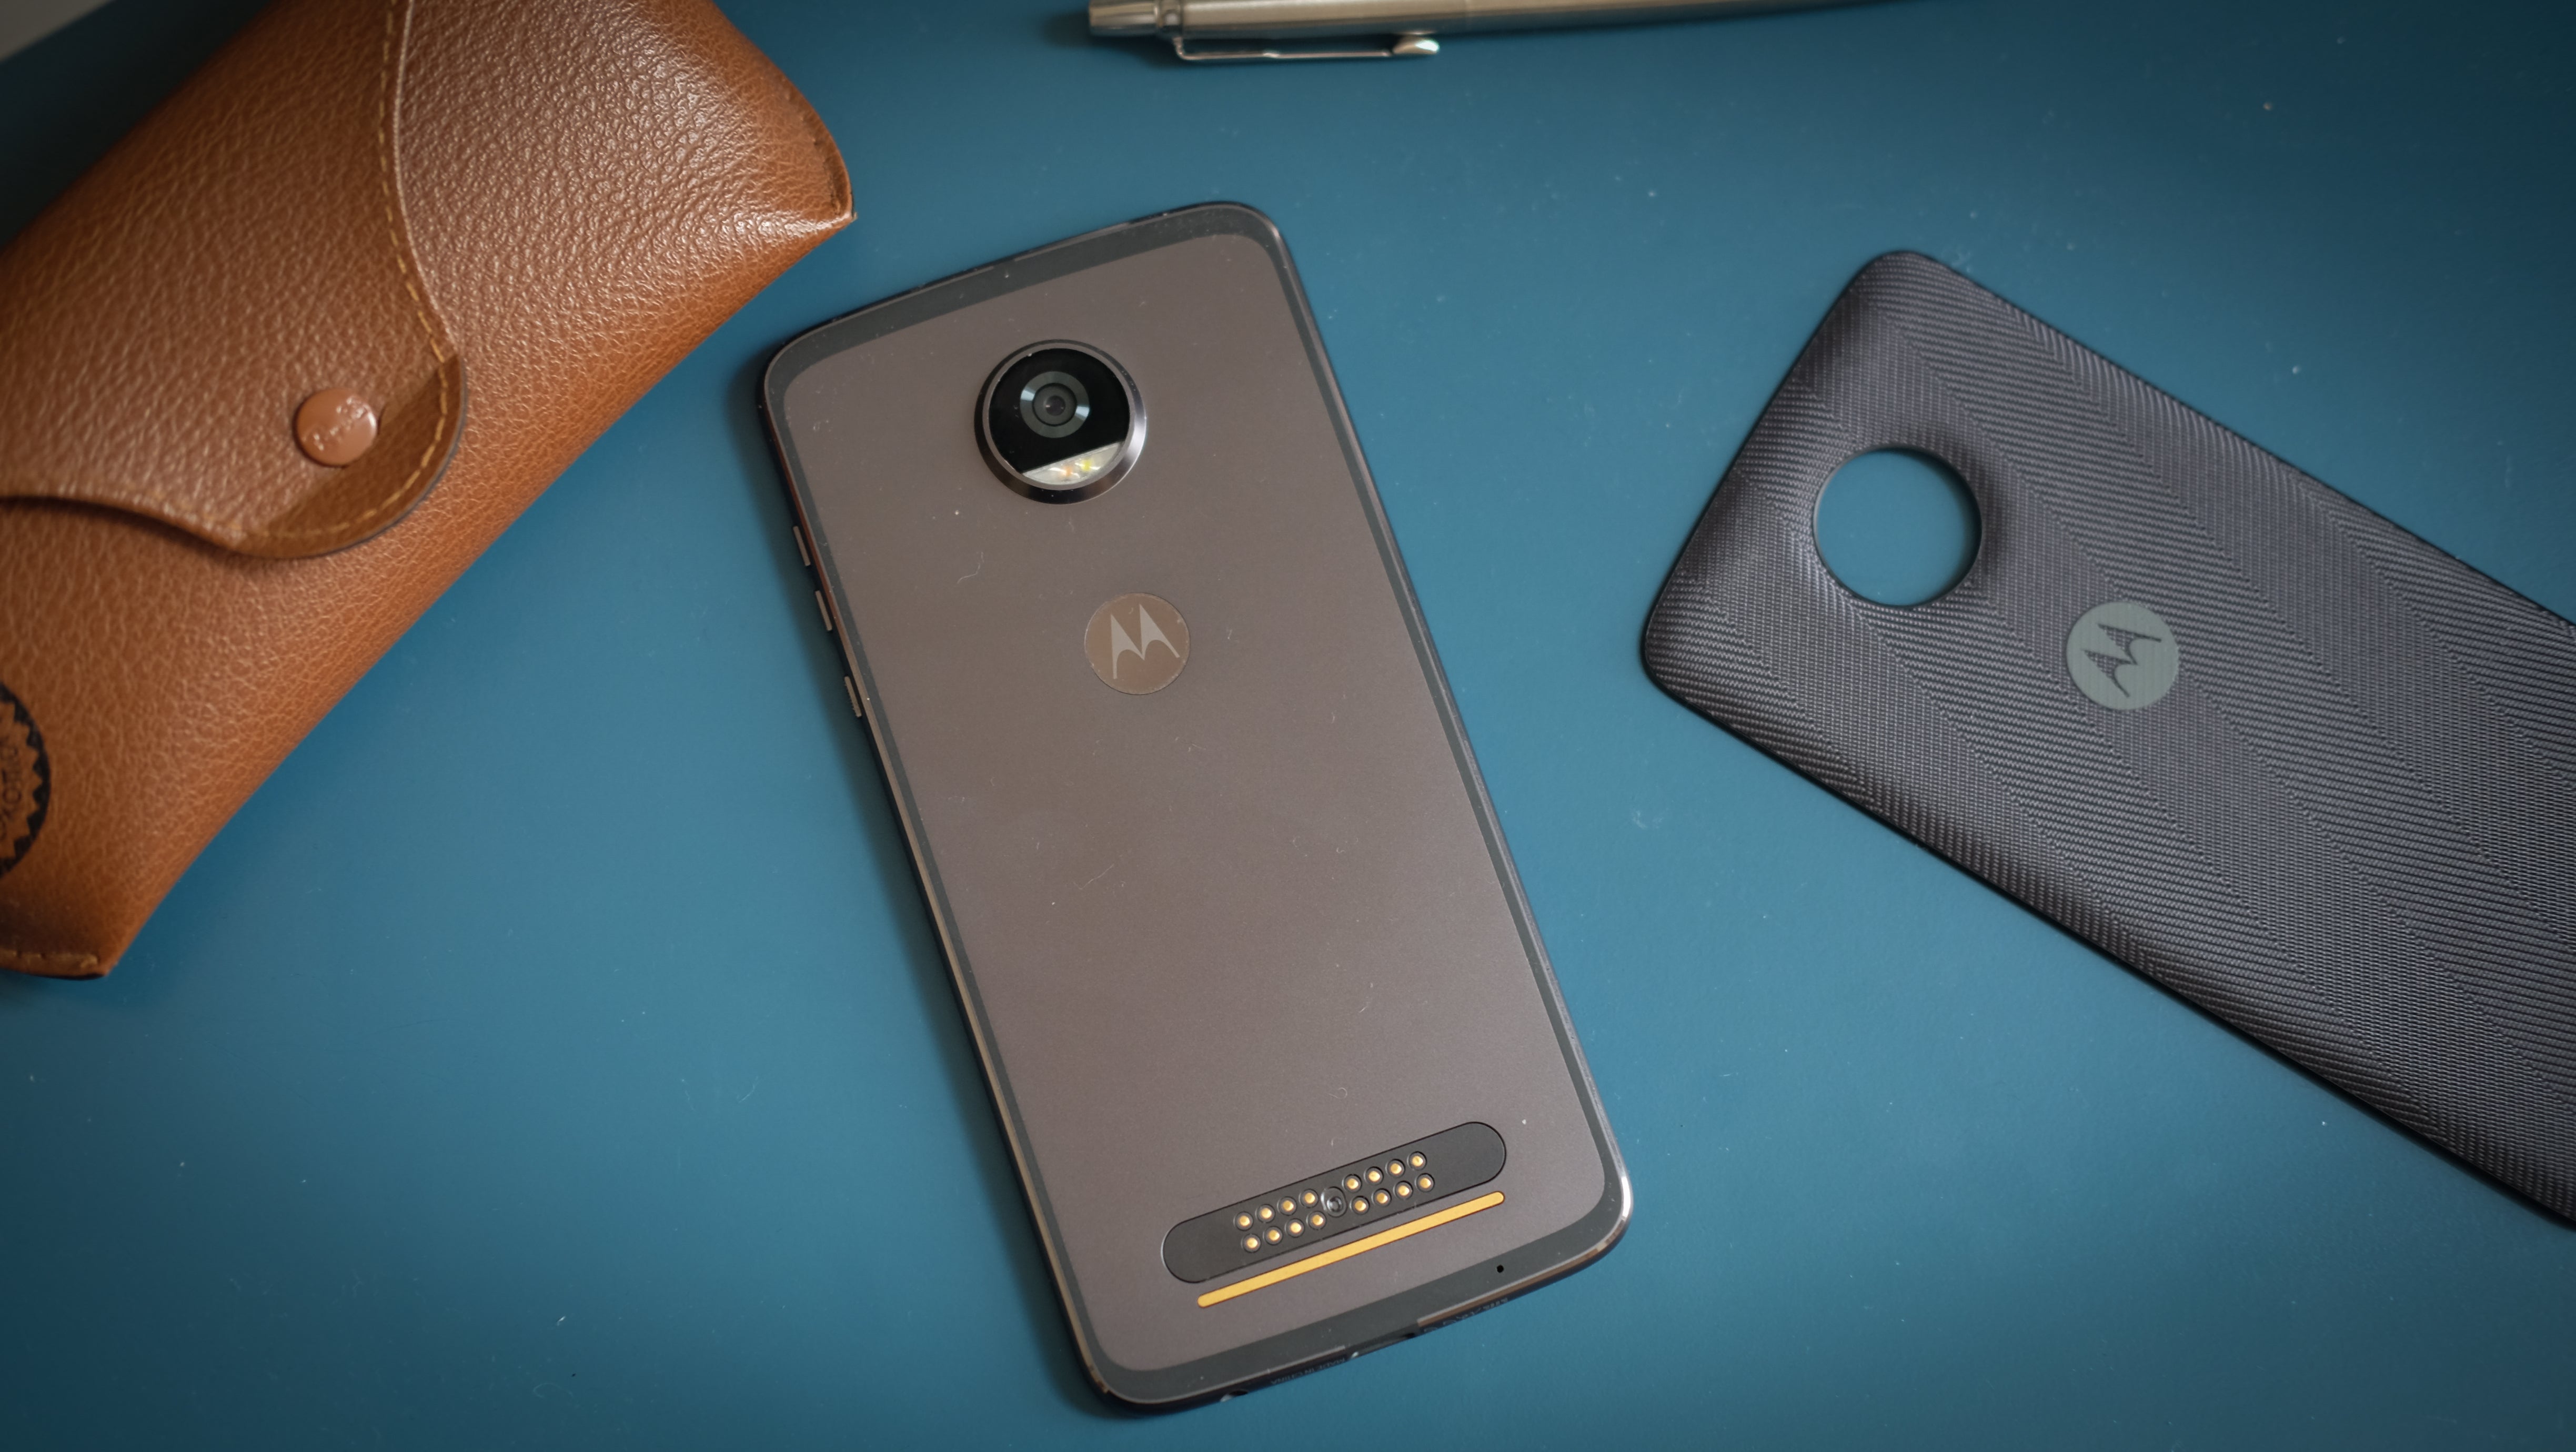 Moto Z2 Play smartphone with accessories on a blue surface.